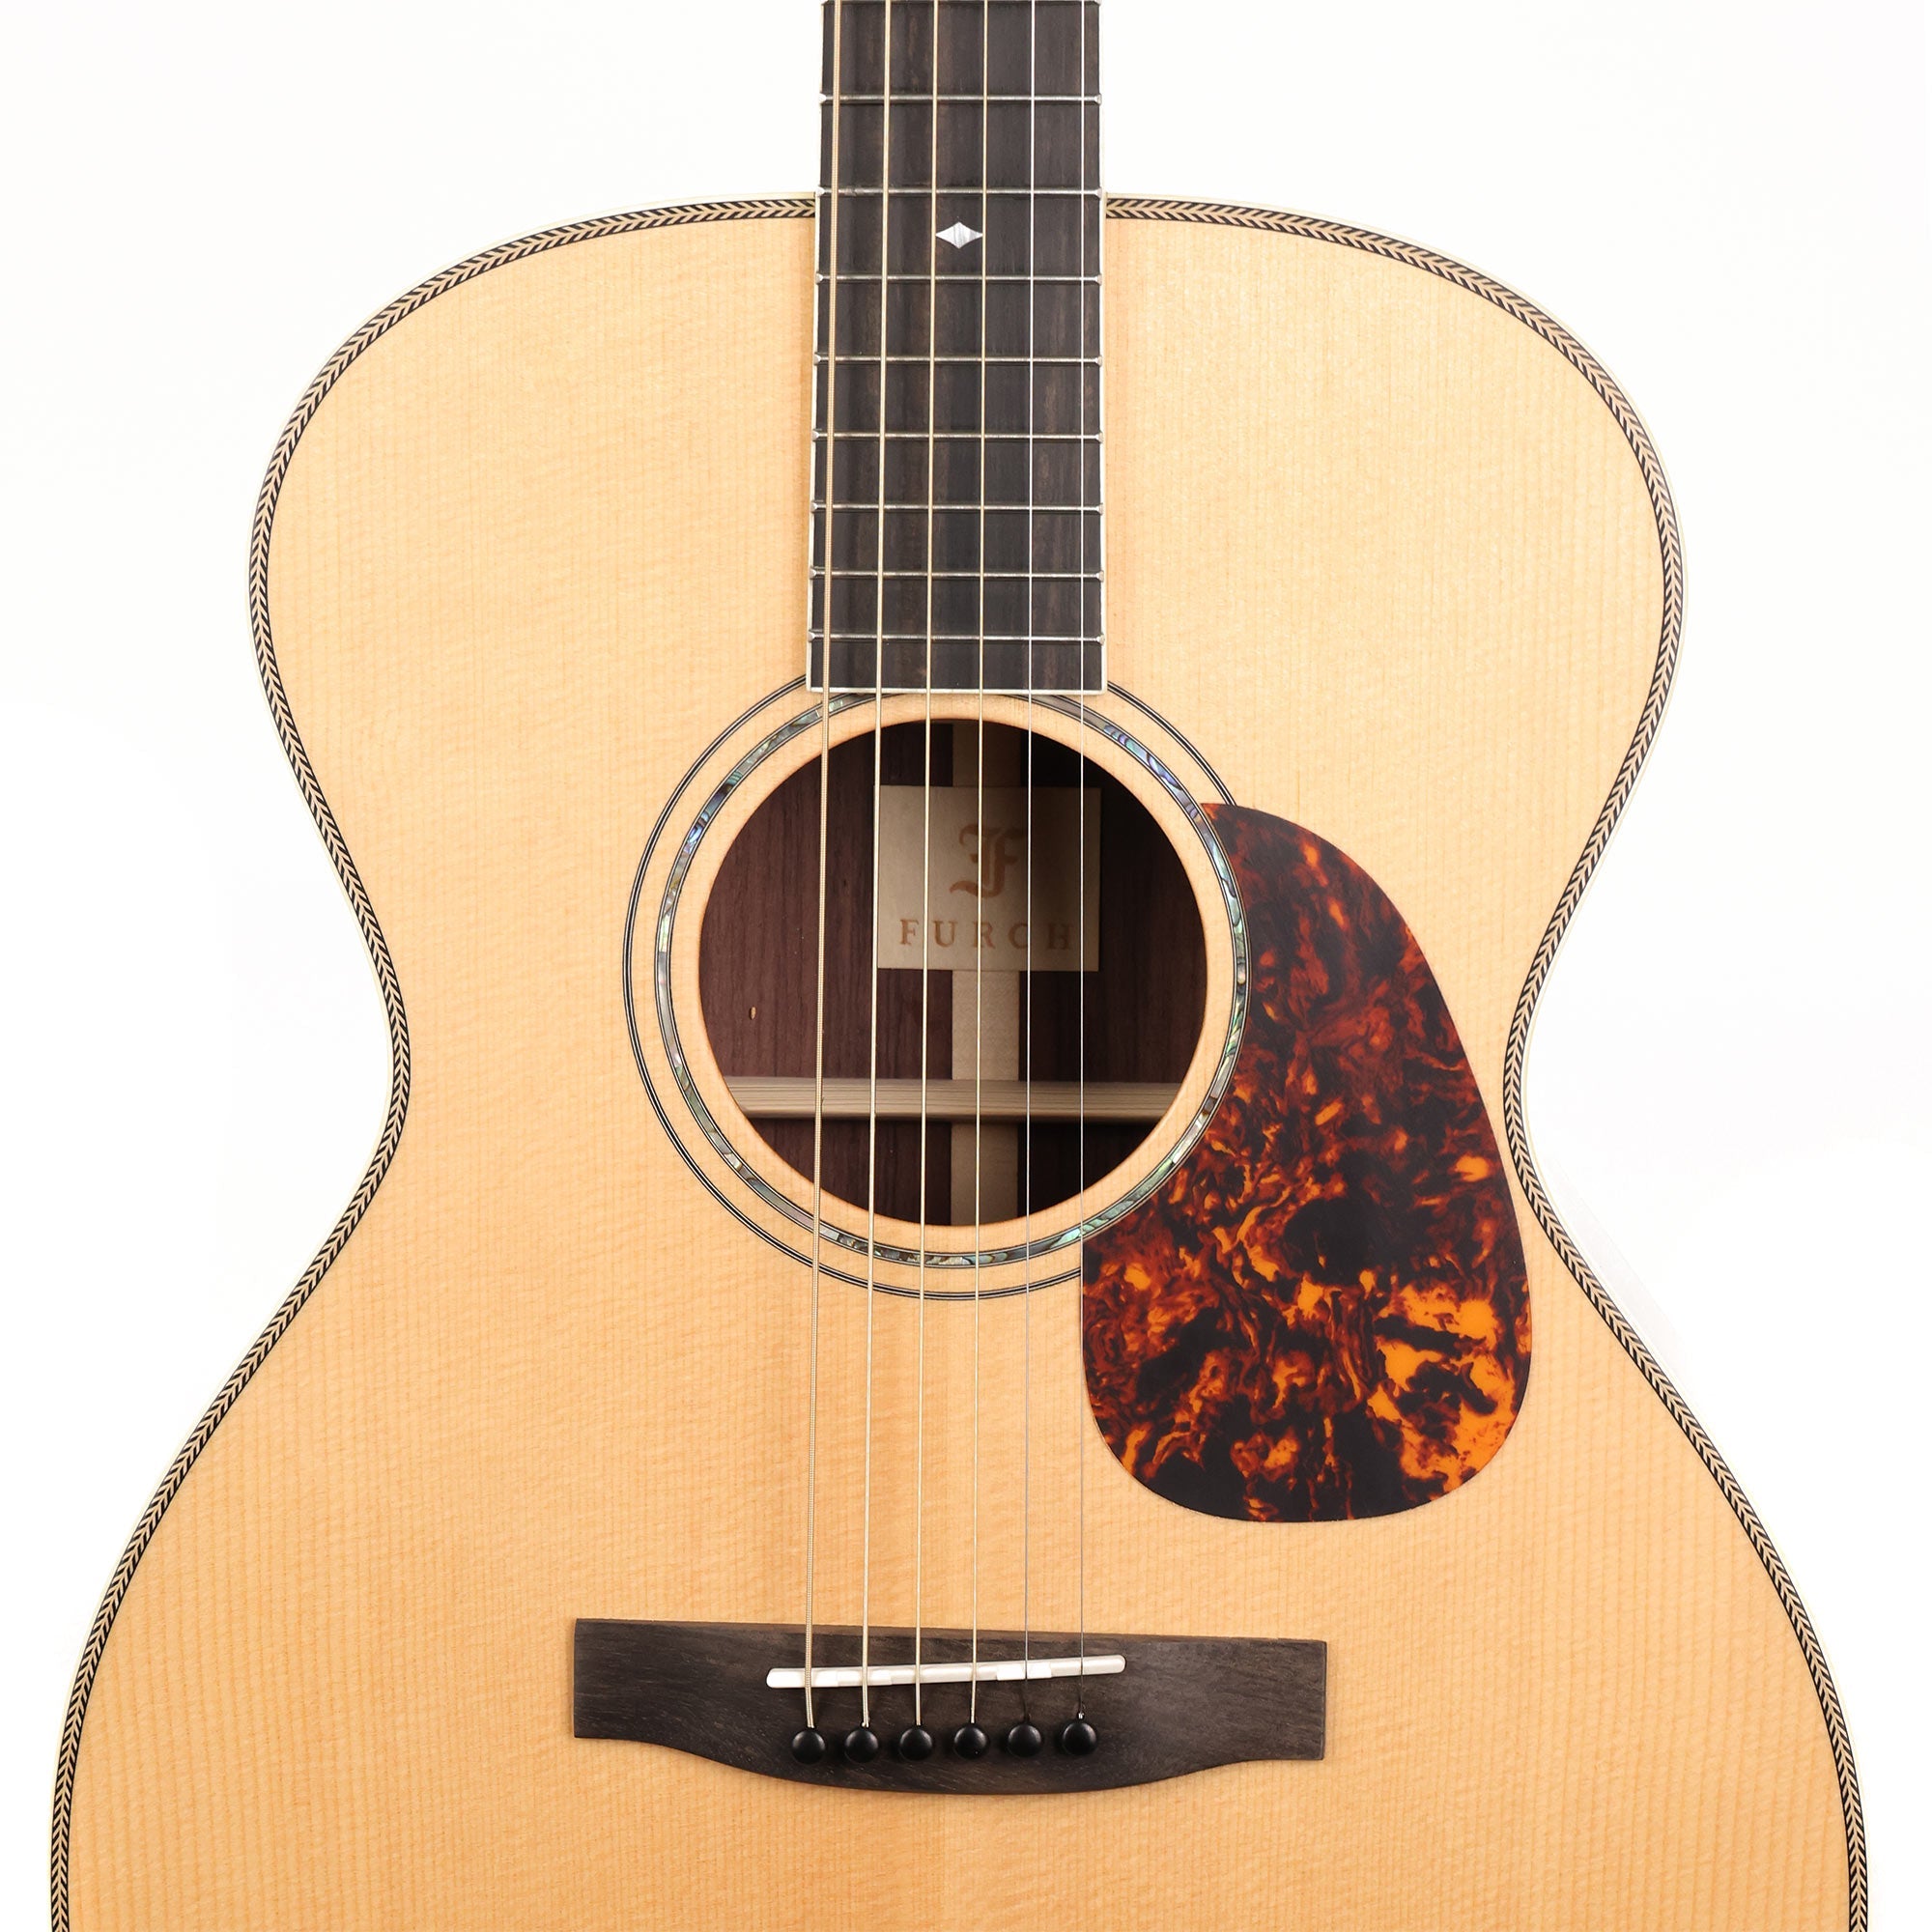 Furch Vintage 2 OM-SR SL Acoustic Guitar Natural | The Music Zoo